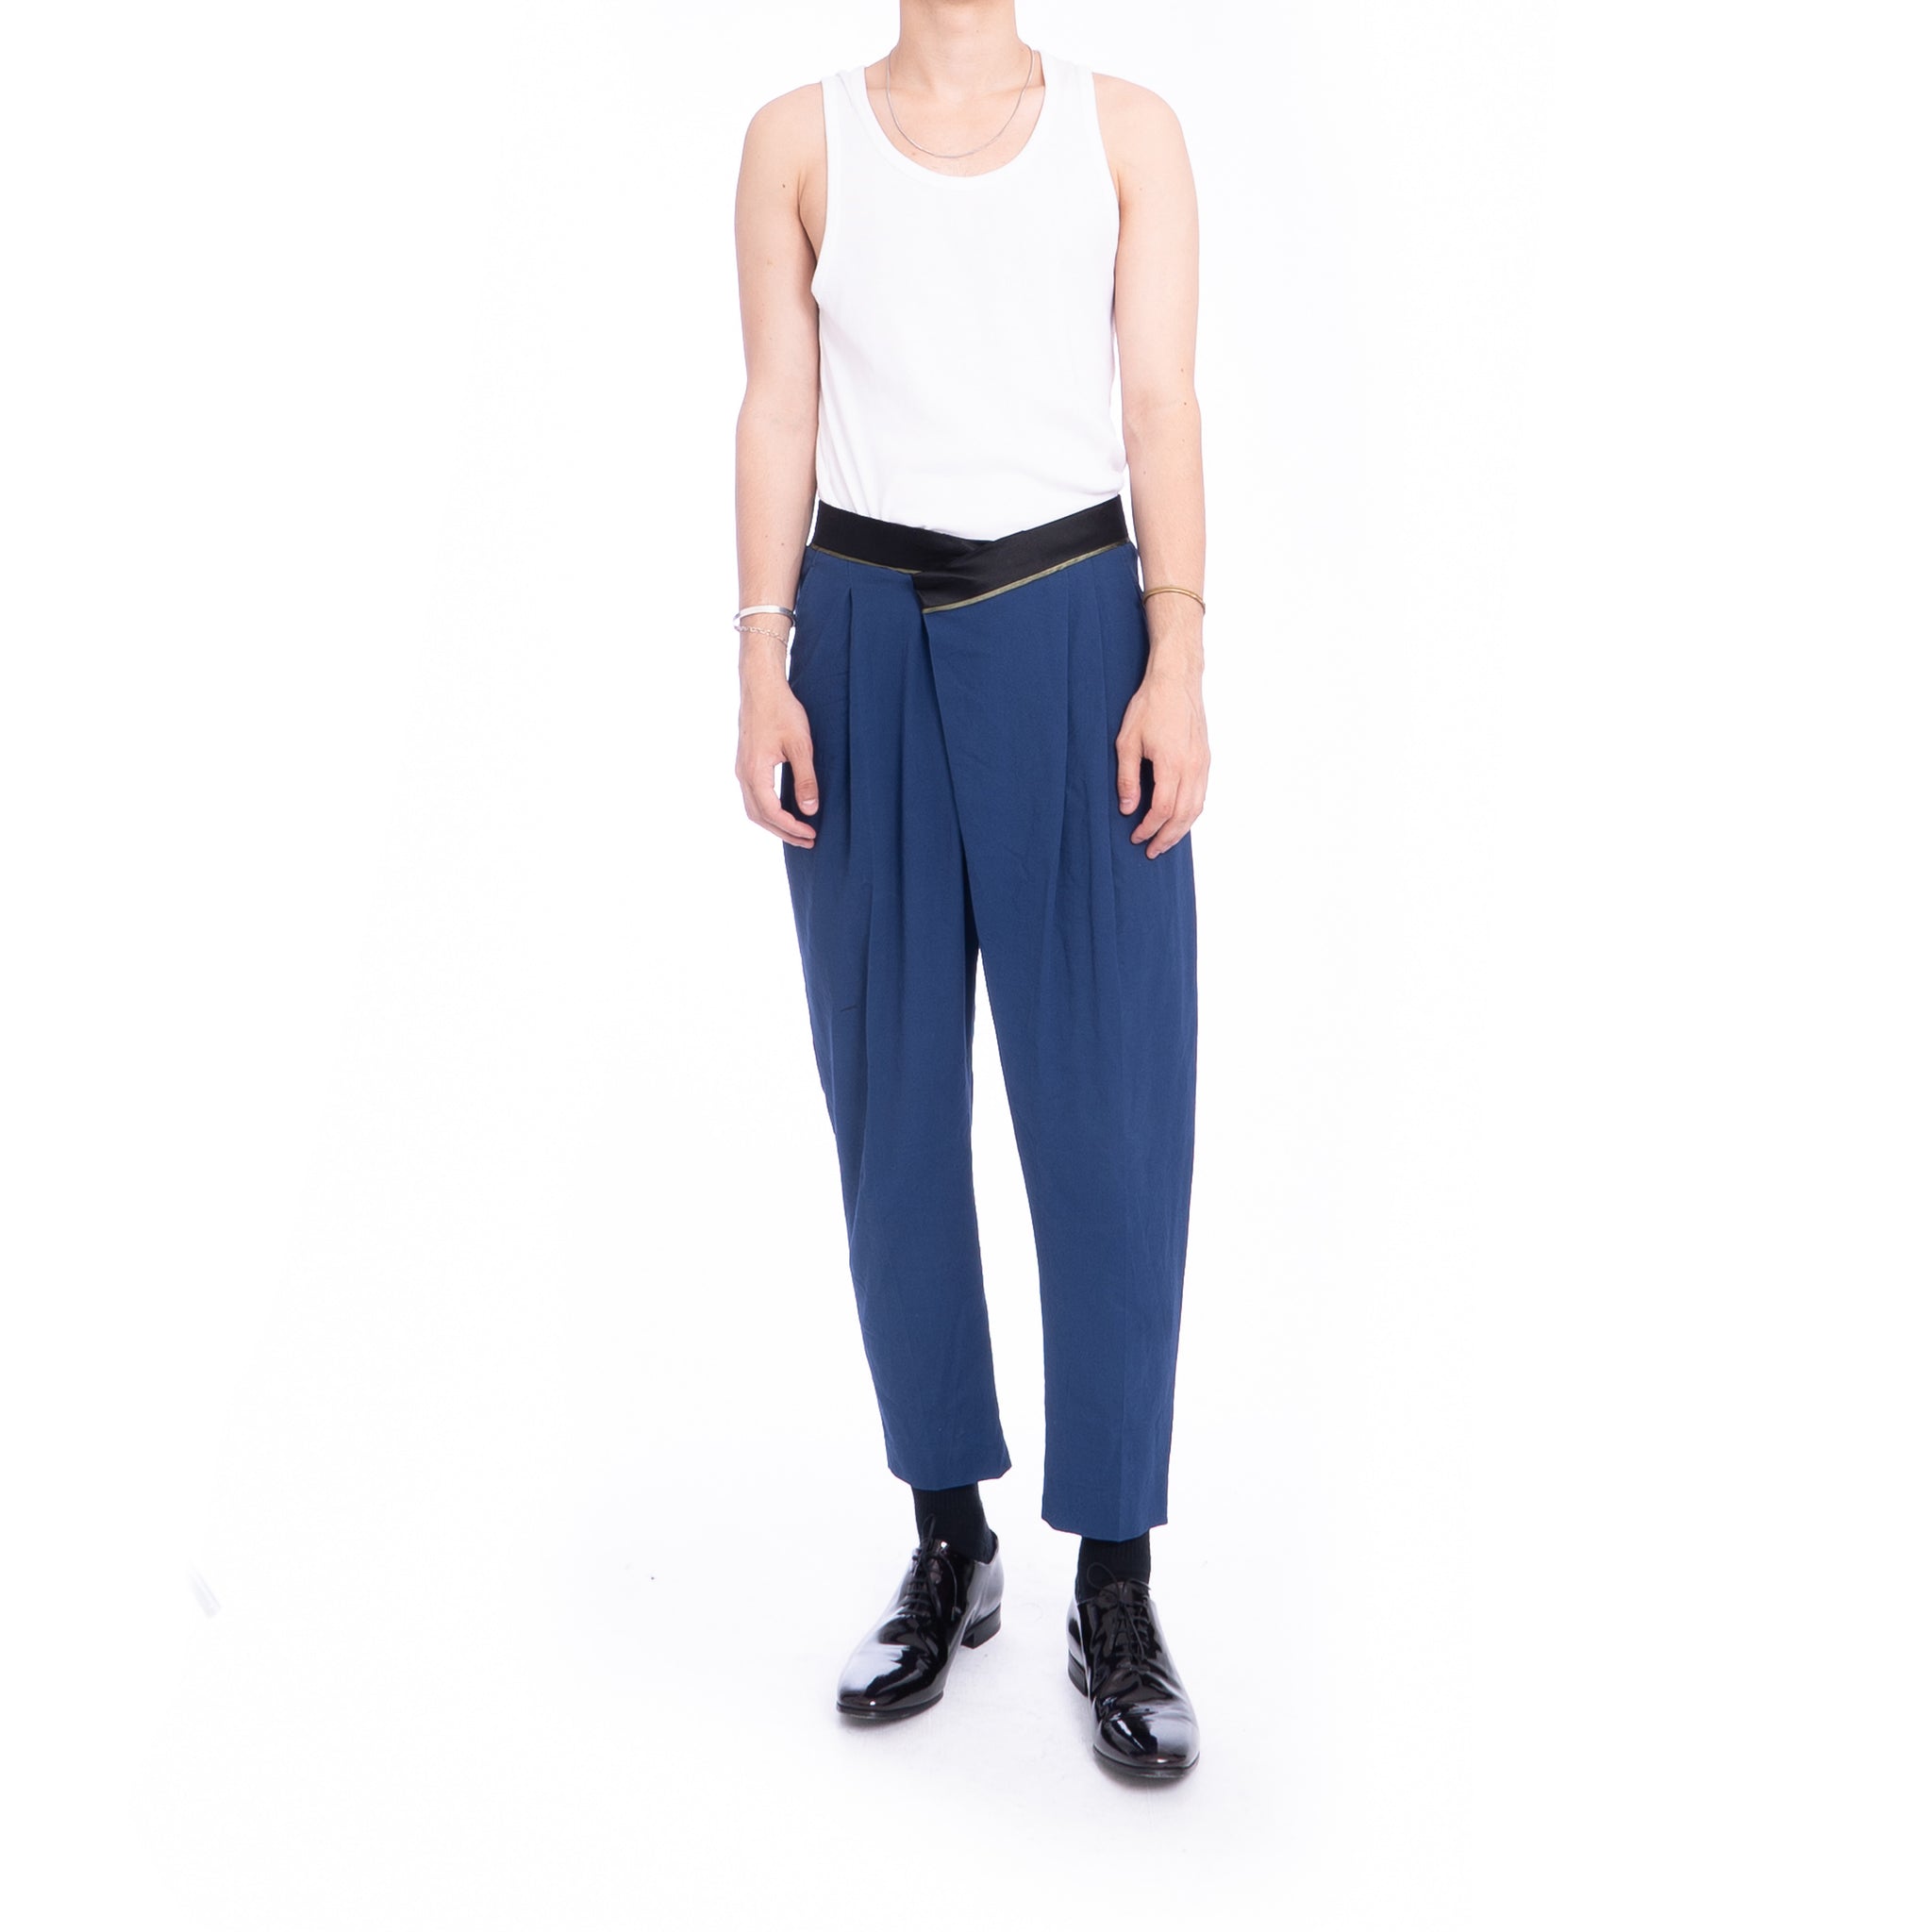 SS17 Blue Origami Trousers 1 of 1 Sample – Backyardarchive